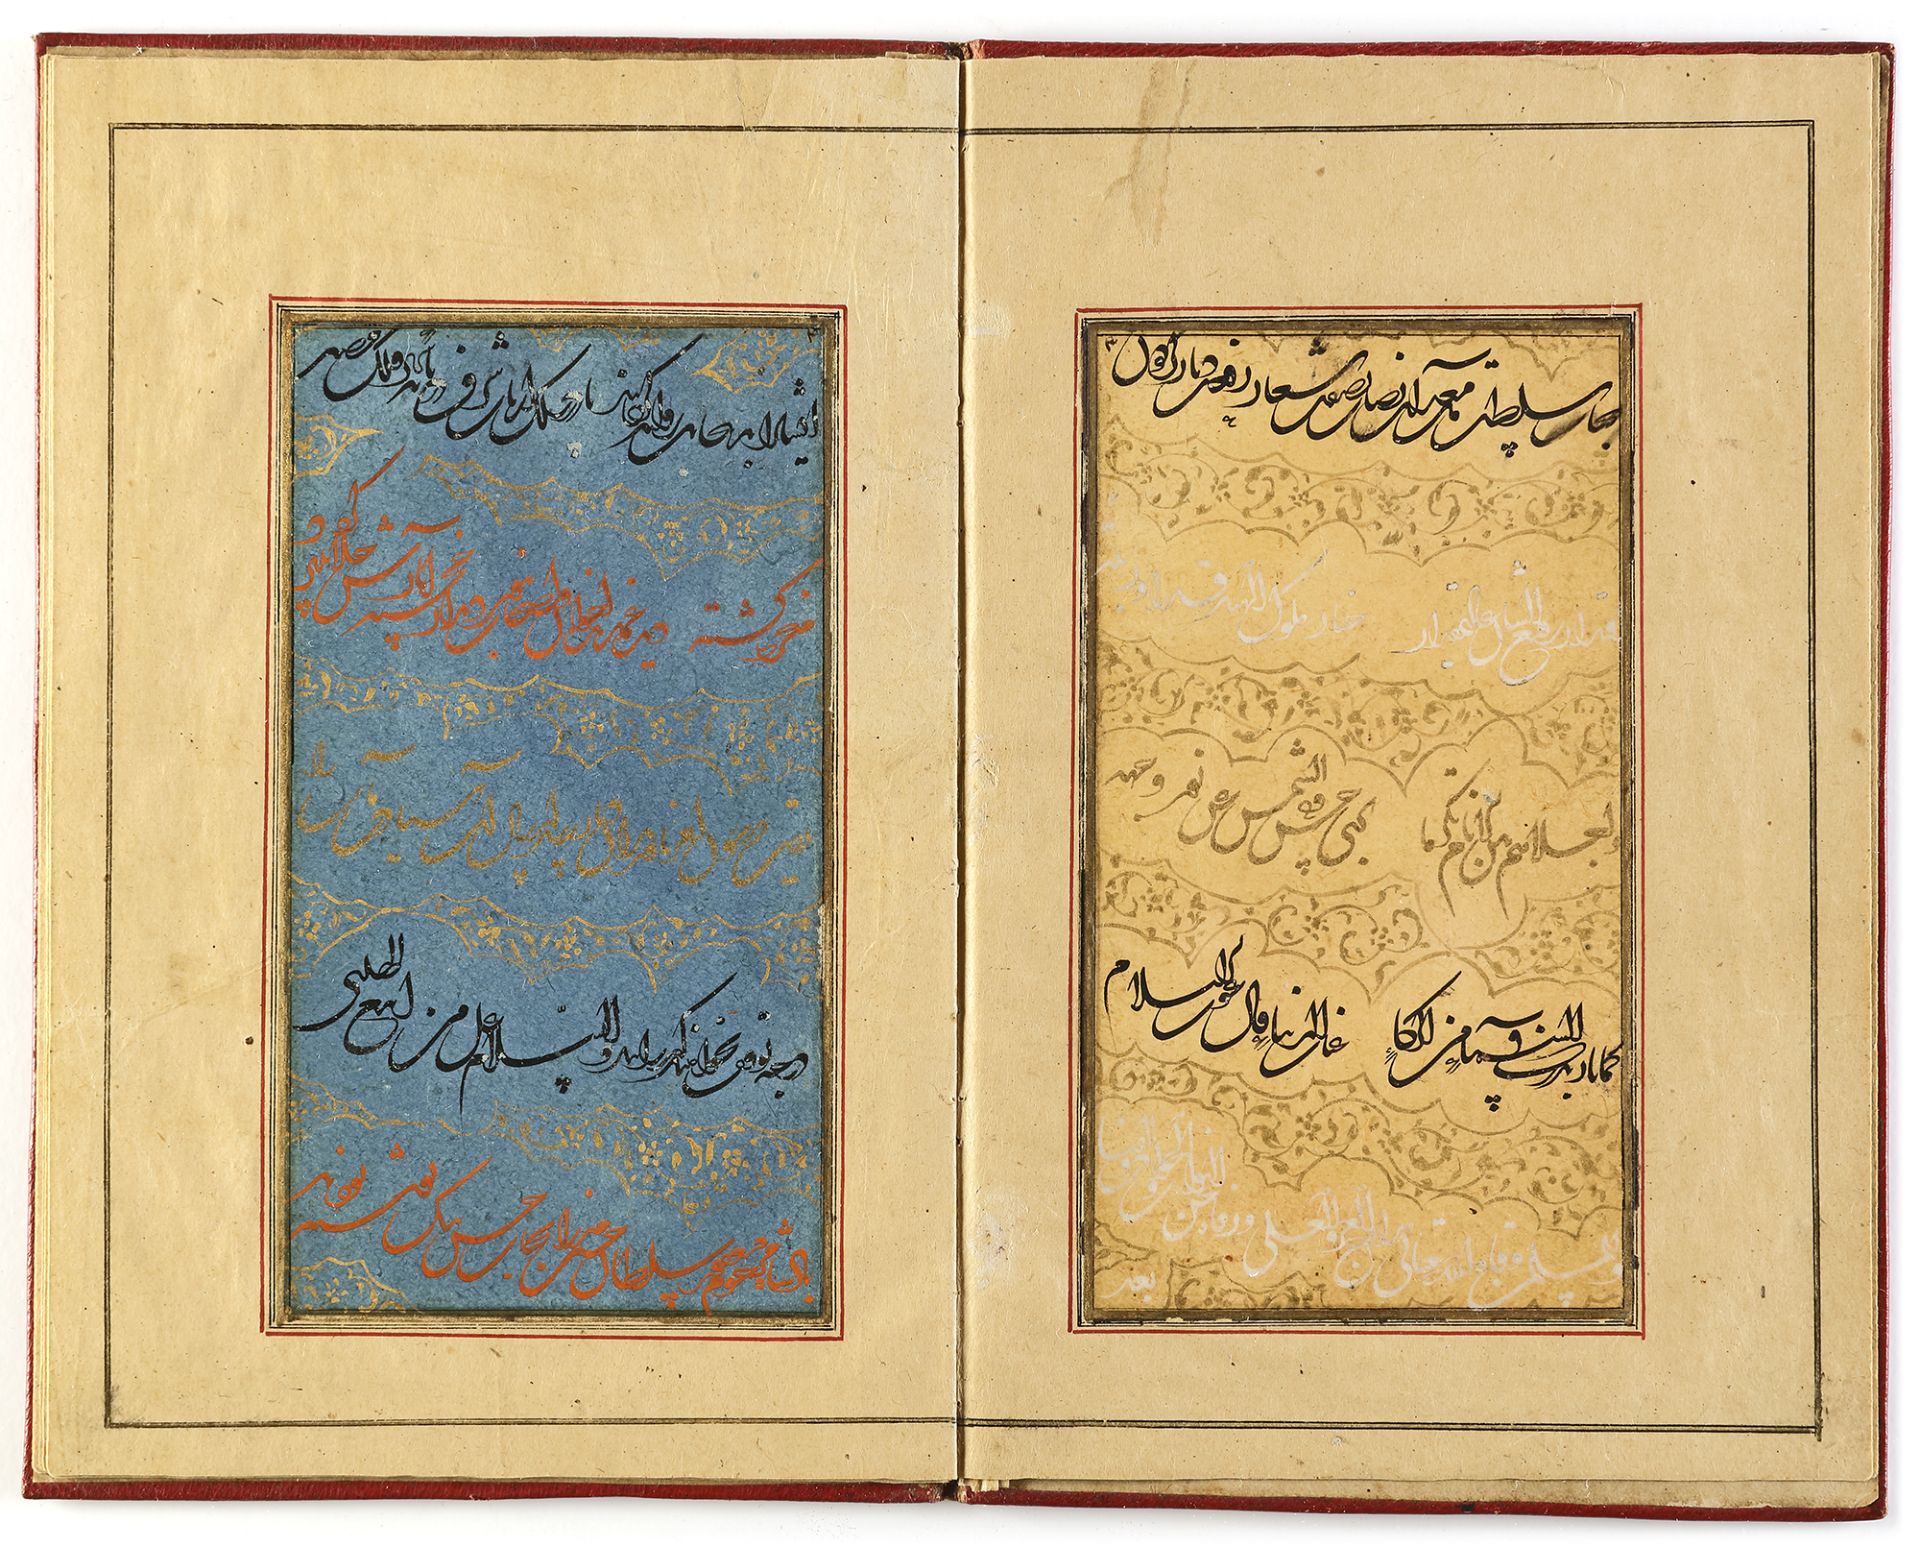 A MANUSCRIPT OF POETRY, SIGNED BY IKHTIYAR AL-MUNSHI, PERSIA, SAVAFID, DATED 975 AH/1567-68 AD - Image 16 of 18